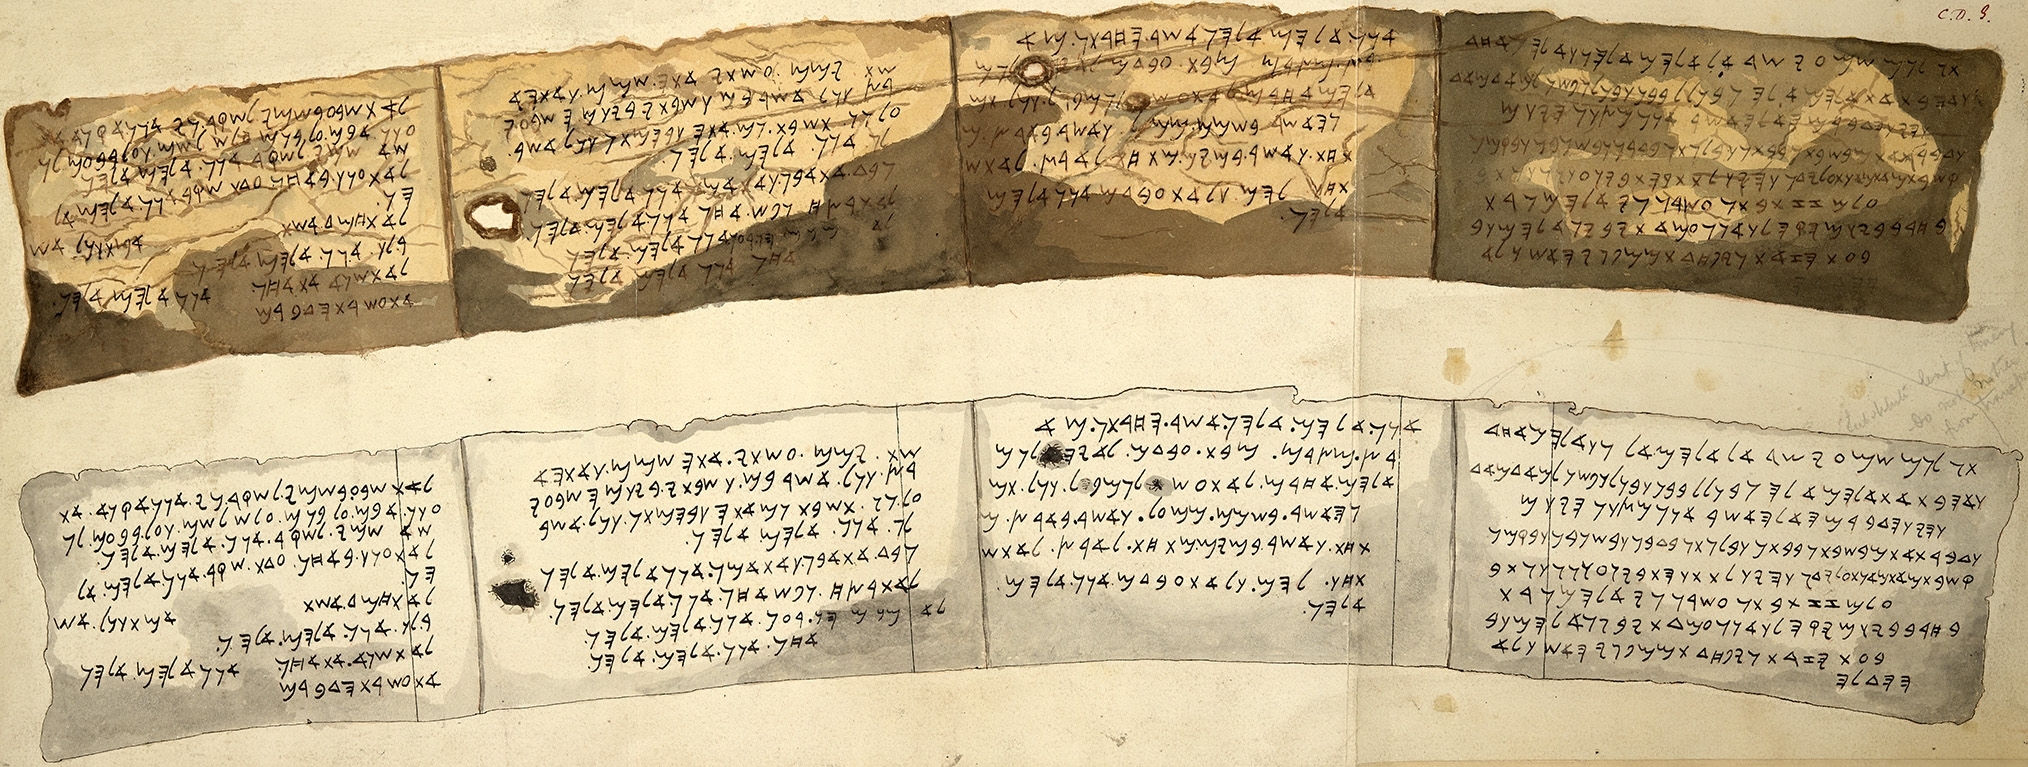 Was The Shapira Deuteronomy A Forgery? Harvard, 3 June 2019 with Enoch Calendar Ancient Hebrew 2019